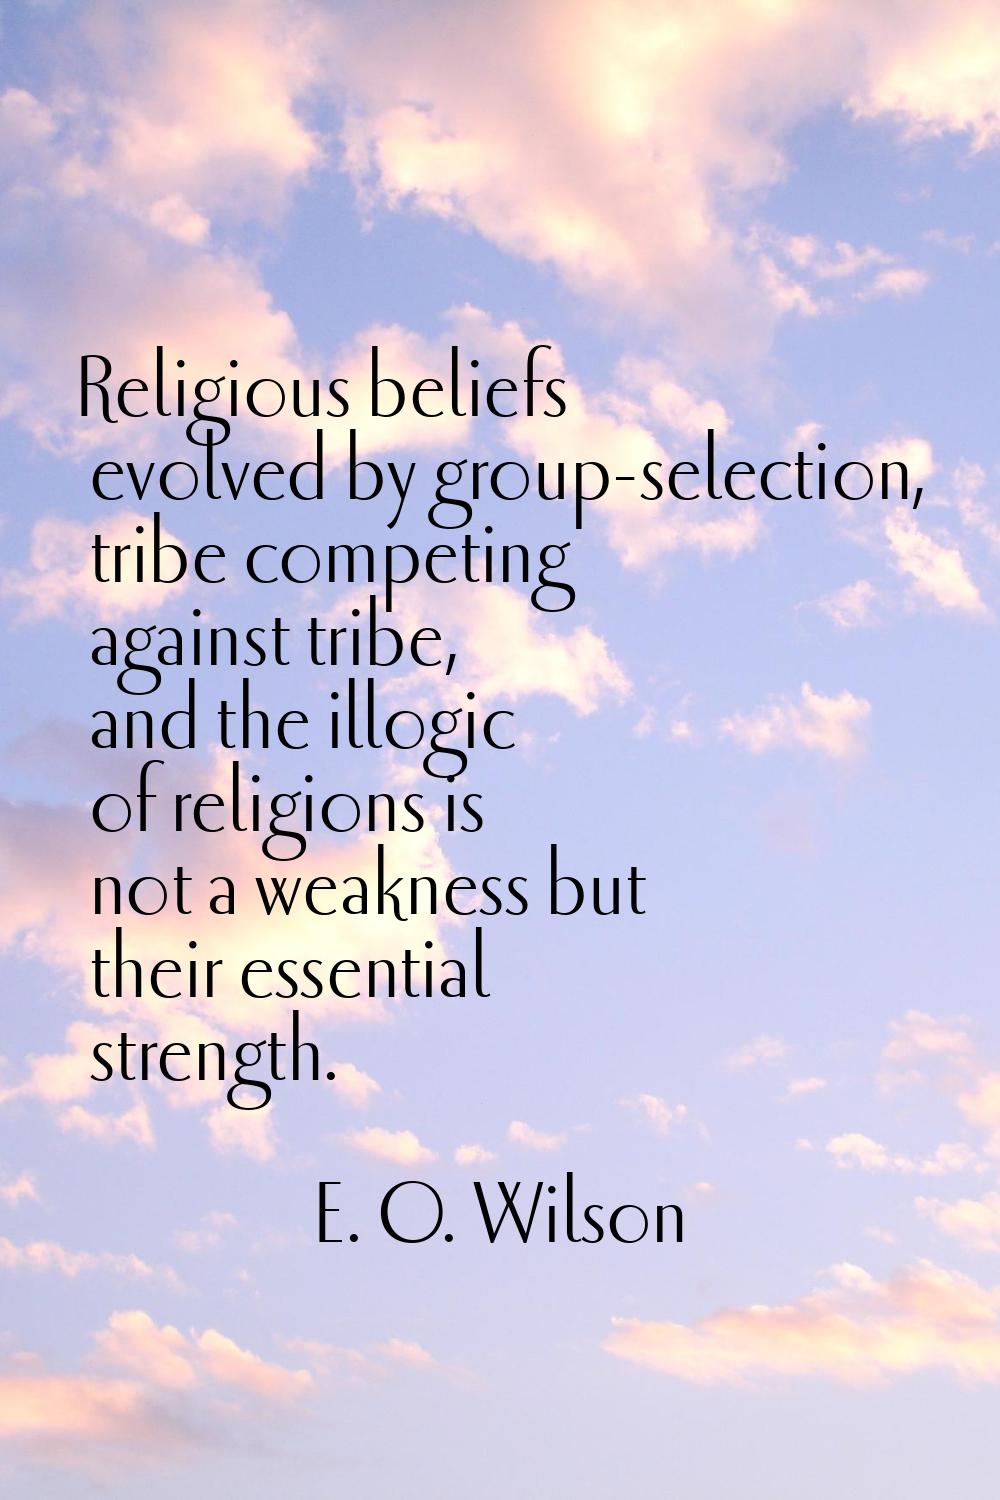 Religious beliefs evolved by group-selection, tribe competing against tribe, and the illogic of rel